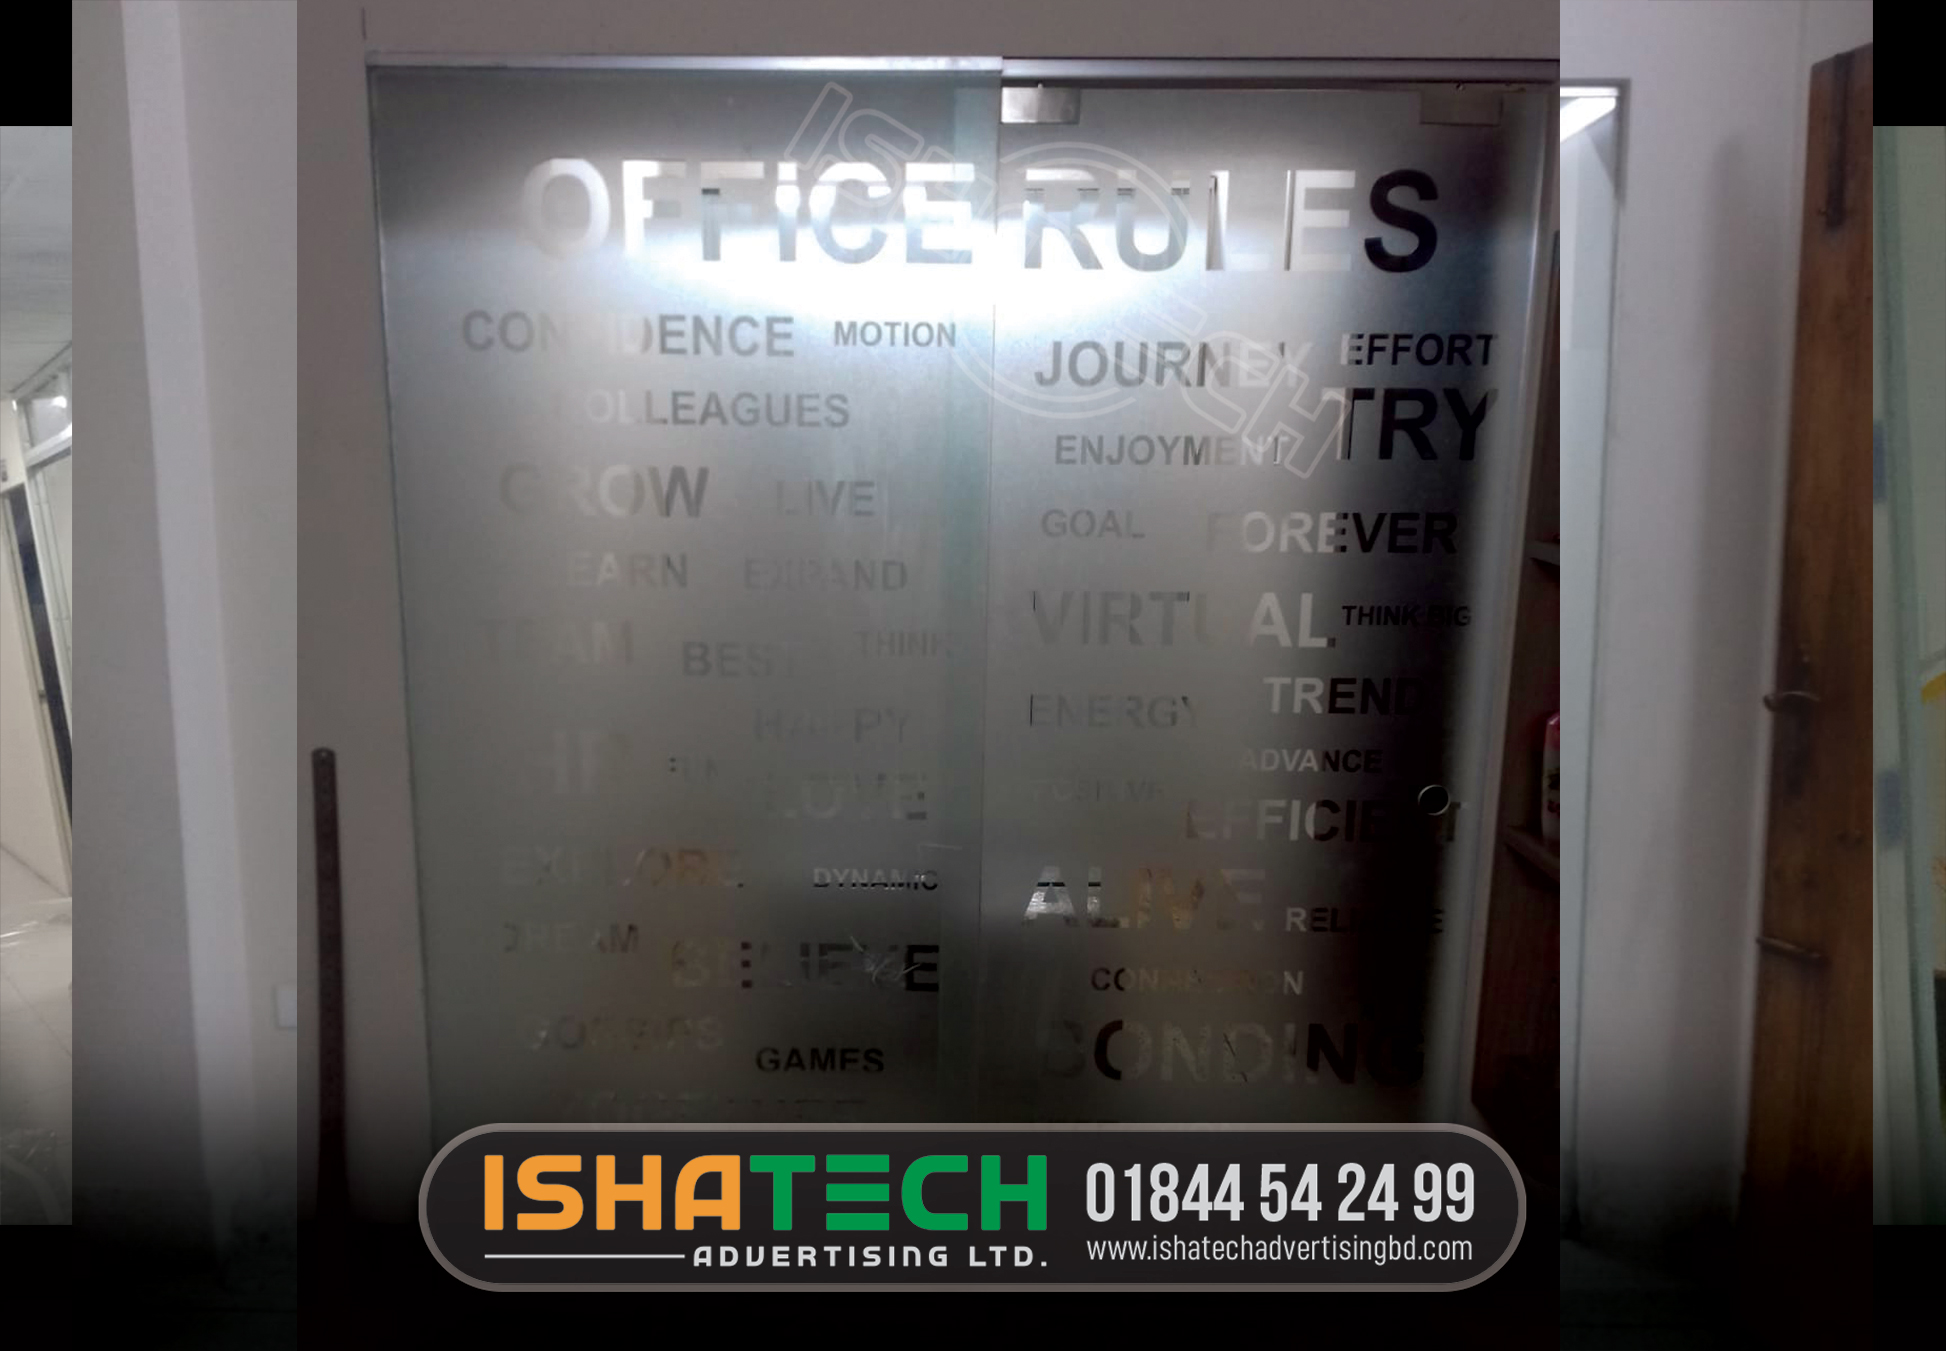 Office frosted glass sticker bd price Office frosted glass sticker bd near me Best office frosted glass sticker bd frosted glass sticker price in bangladesh thai glass sticker price in bangladesh thai glass paper price in bangladesh glass paper design in bangladesh led sign bd